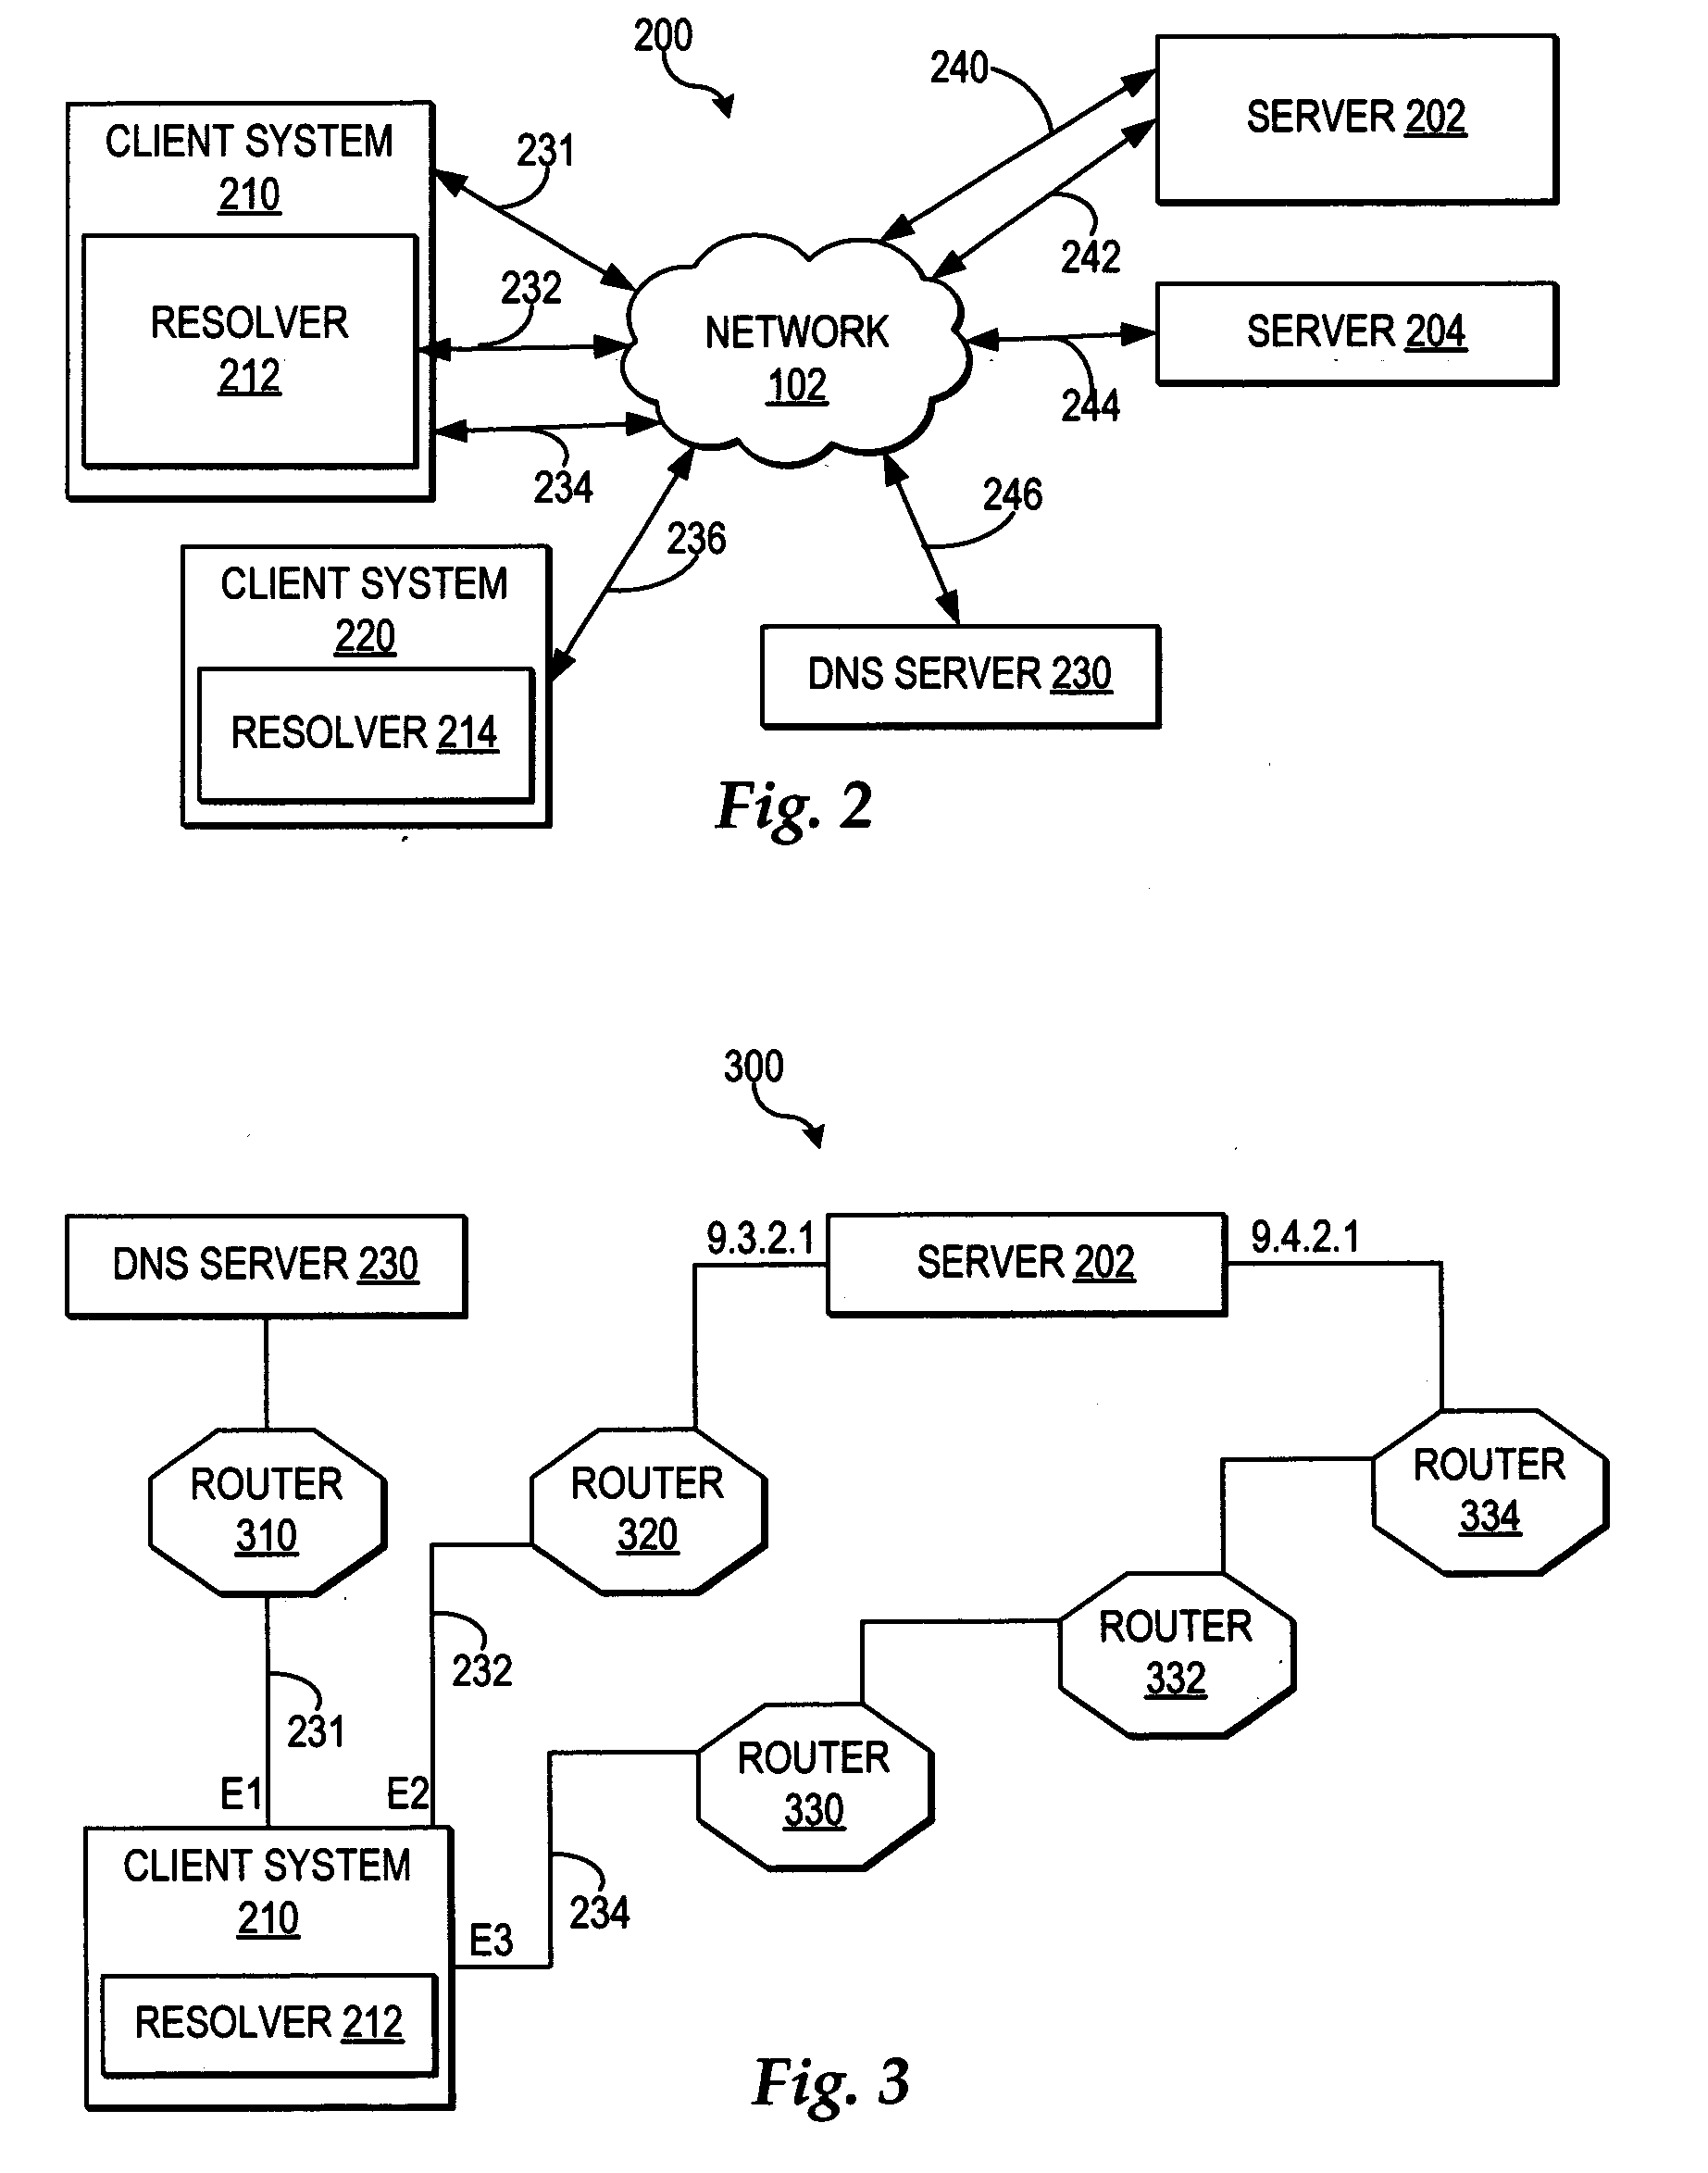 Resolver caching of a shortest path to a multihomed server as determined by a router